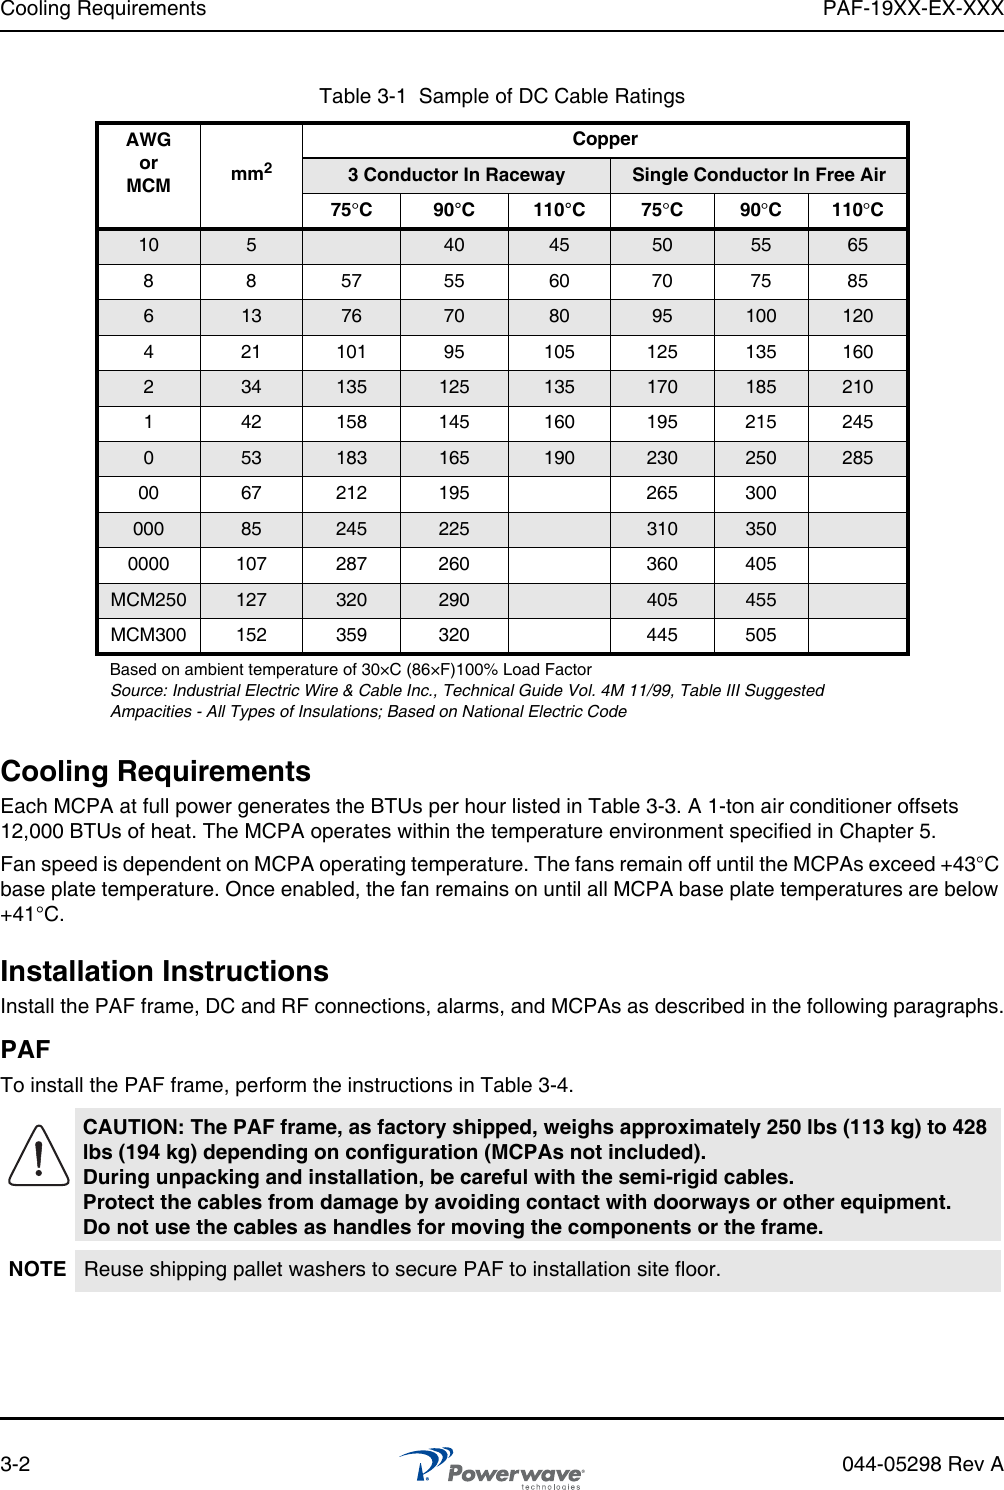 Cooling Requirements PAF-19XX-EX-XXX3-2 044-05298 Rev ACooling RequirementsEach MCPA at full power generates the BTUs per hour listed in Table 3-3. A 1-ton air conditioner offsets 12,000 BTUs of heat. The MCPA operates within the temperature environment specified in Chapter 5.Fan speed is dependent on MCPA operating temperature. The fans remain off until the MCPAs exceed +43°C base plate temperature. Once enabled, the fan remains on until all MCPA base plate temperatures are below +41°C. Installation InstructionsInstall the PAF frame, DC and RF connections, alarms, and MCPAs as described in the following paragraphs.PAF To install the PAF frame, perform the instructions in Table 3-4.Table 3-1  Sample of DC Cable RatingsAWGorMCM mm2Copper3 Conductor In Raceway Single Conductor In Free Air75°C 90°C 110°C 75°C90°C110°C10 540 45 50 55 658 8 57 55 60 70 75 85613 76 70 80 95 100 1204 21 101 95 105 125 135 160234 135 125 135 170 185 2101 42 158 145 160 195 215 245053 183 165 190 230 250 28500 67 212 195 265 300000 85 245 225 310 3500000 107 287 260 360 405MCM250 127 320 290 405 455MCM300 152 359 320 445 505Based on ambient temperature of 30×C (86×F)100% Load Factor Source: Industrial Electric Wire &amp; Cable Inc., Technical Guide Vol. 4M 11/99, Table III Suggested Ampacities - All Types of Insulations; Based on National Electric CodeCAUTION: The PAF frame, as factory shipped, weighs approximately 250 lbs (113 kg) to 428 lbs (194 kg) depending on configuration (MCPAs not included). During unpacking and installation, be careful with the semi-rigid cables. Protect the cables from damage by avoiding contact with doorways or other equipment. Do not use the cables as handles for moving the components or the frame.NOTE Reuse shipping pallet washers to secure PAF to installation site floor.